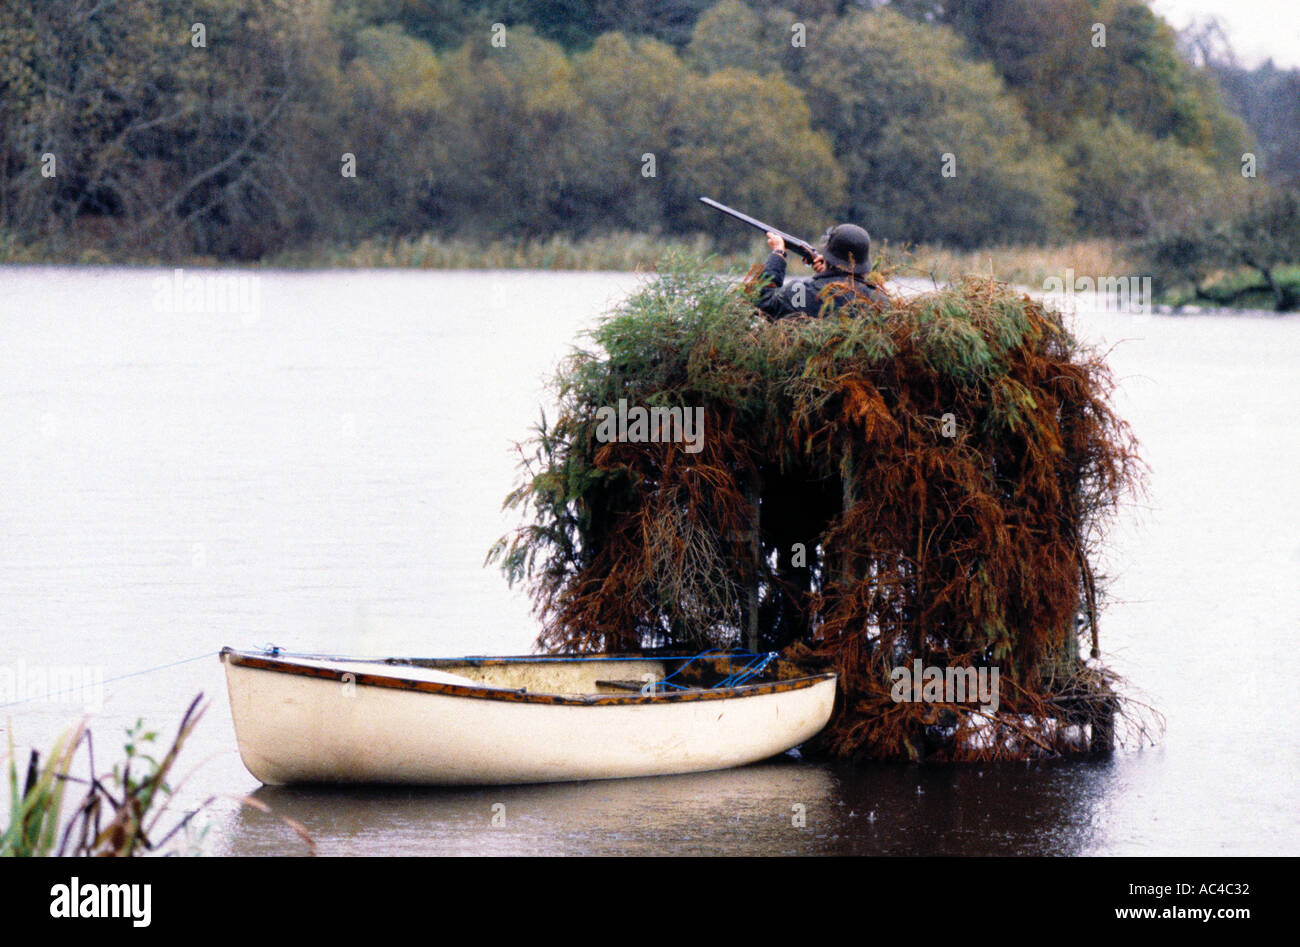 A shooter in a hide at a duck shoot on a lake in Ireland Stock Photo